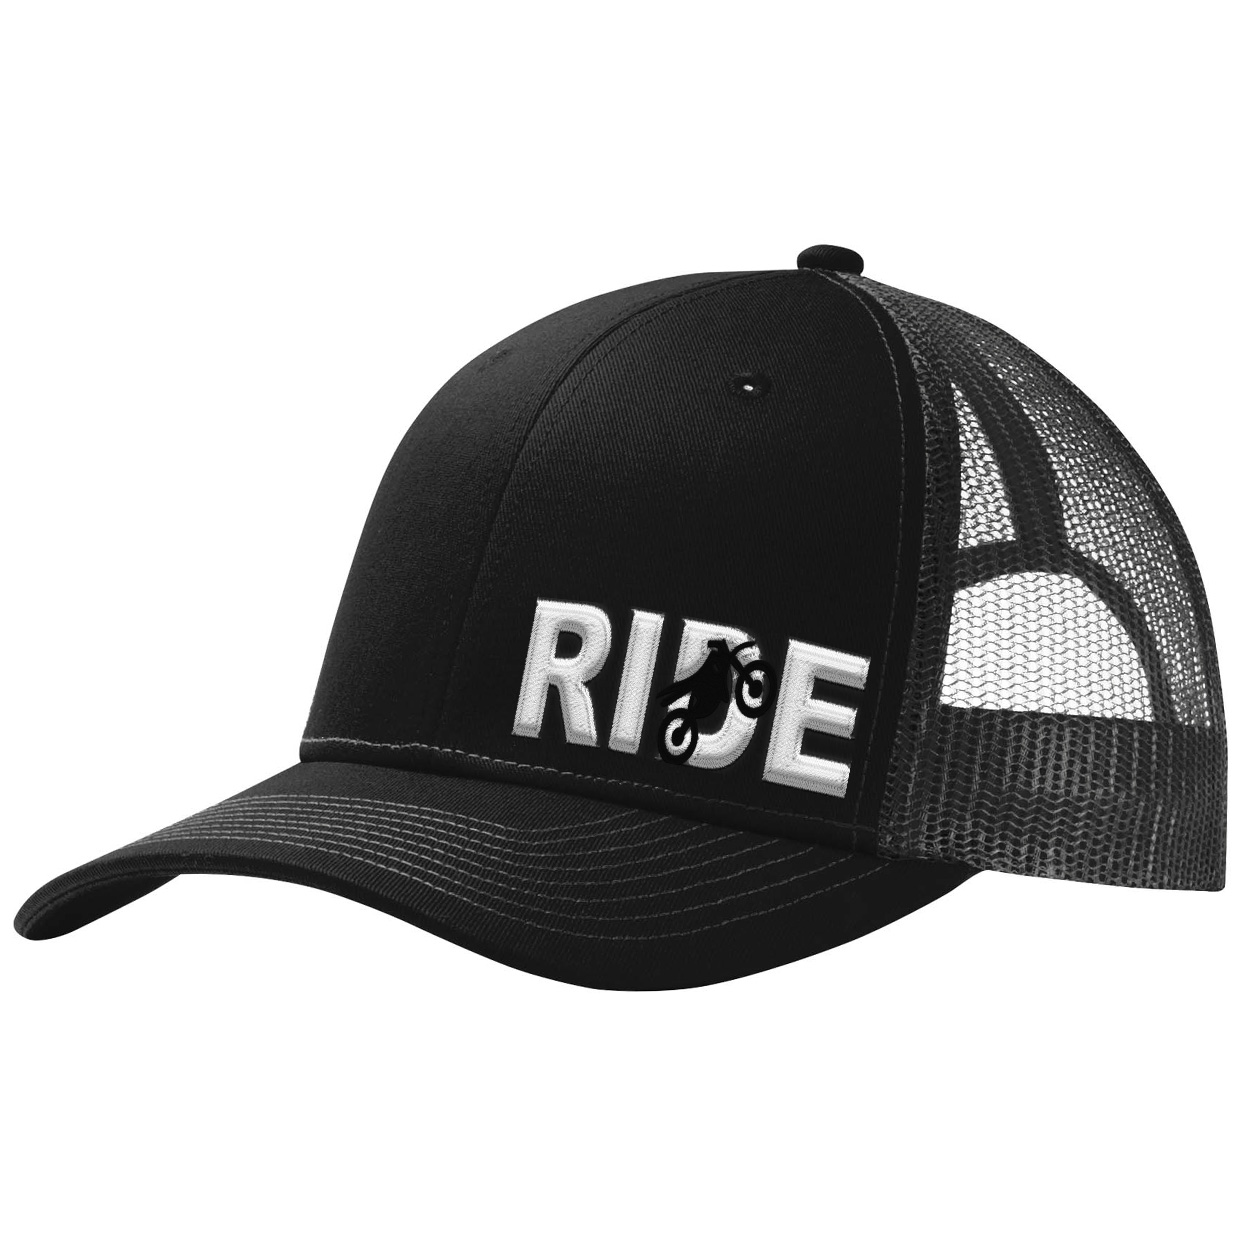 Ride Moto Logo Night Out Pro Embroidered Snapback Trucker Hat Black/Gray